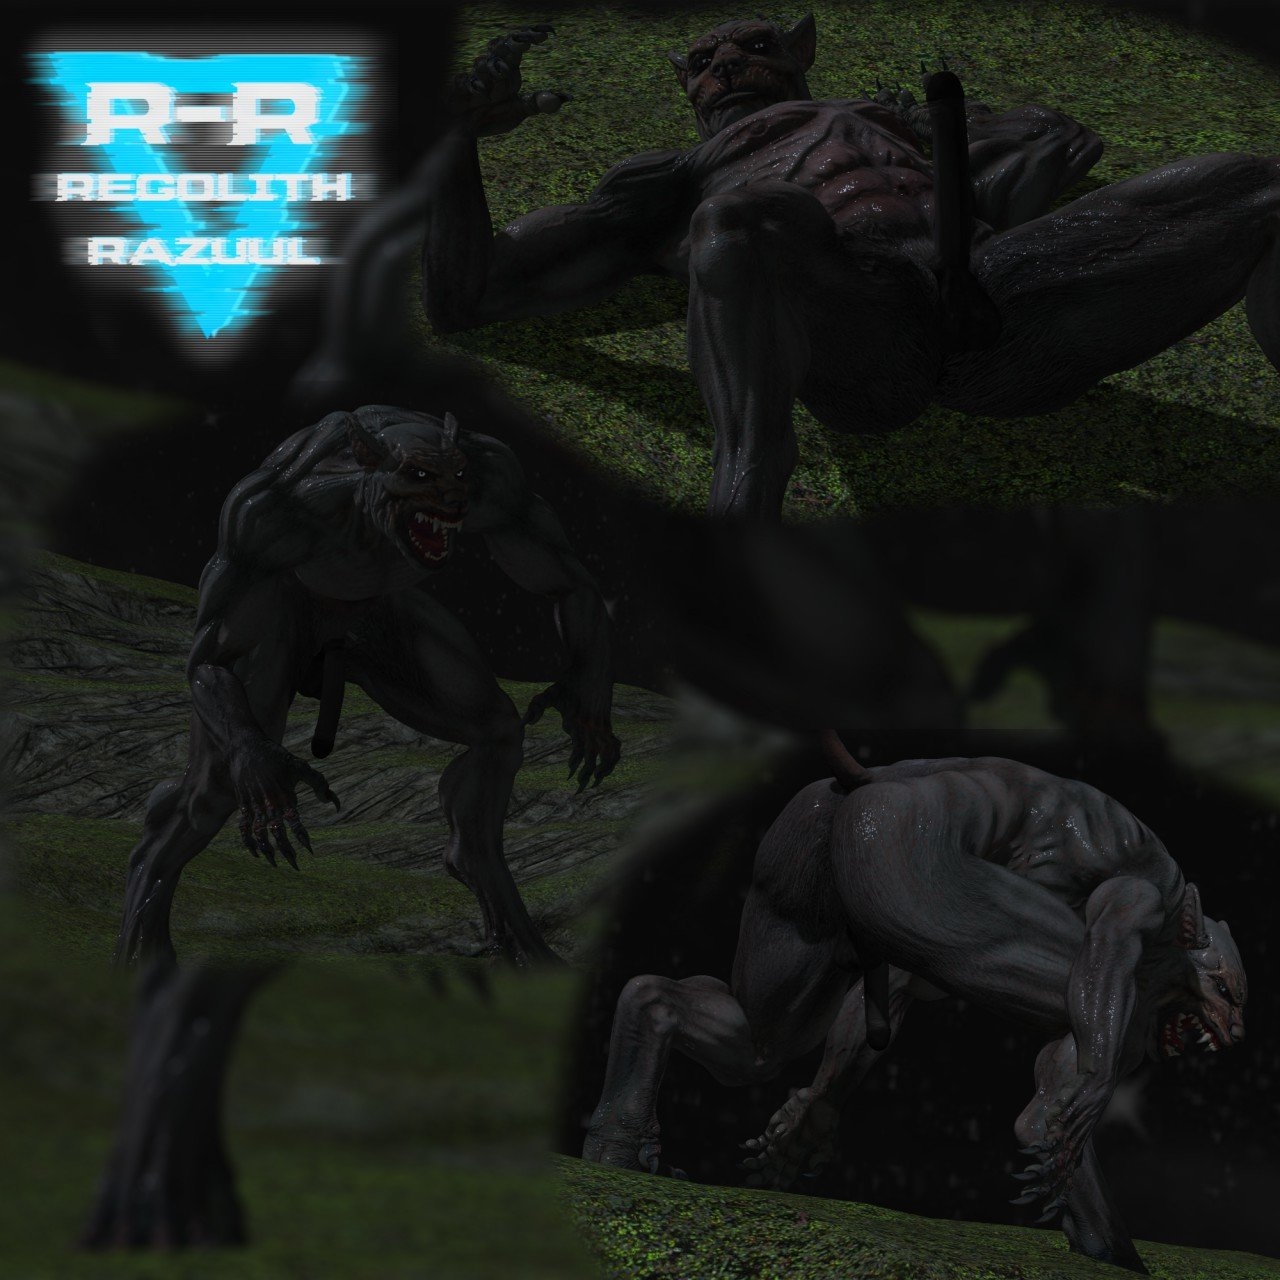 Artwork Gallery for R-A-S-P -- Fur Affinity [dot] net 280